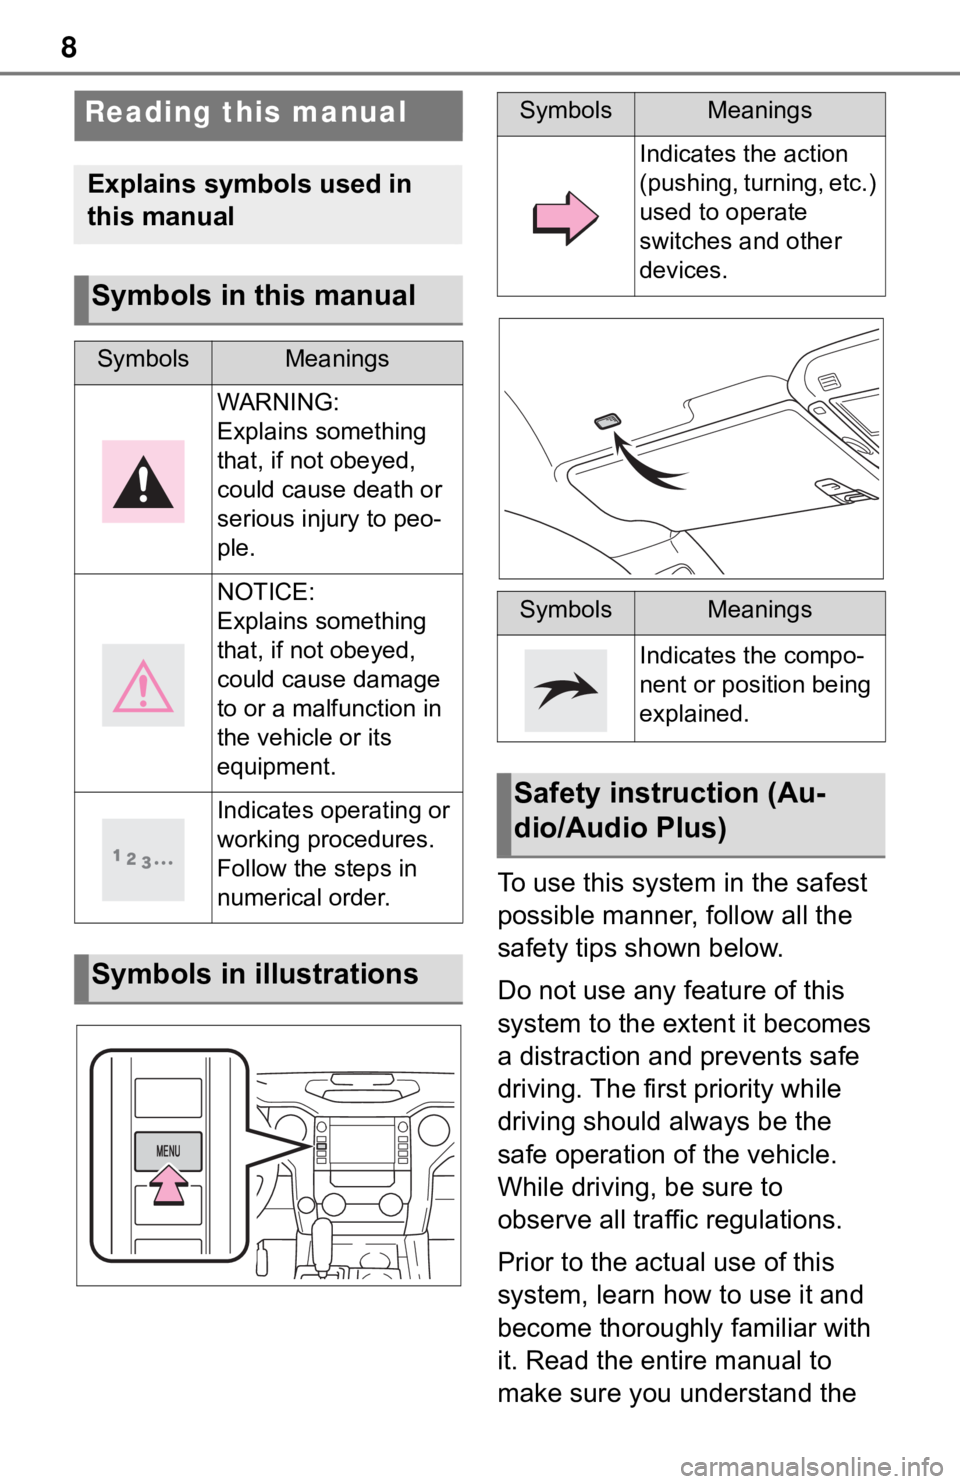 TOYOTA TUNDRA 2020  Accessories, Audio & Navigation (in English) 8
To use this system in the safest 
possible manner, follow all the 
safety tips shown below.
Do not use any feature of this 
system to the extent it becomes 
a distraction and prevents safe 
driving.